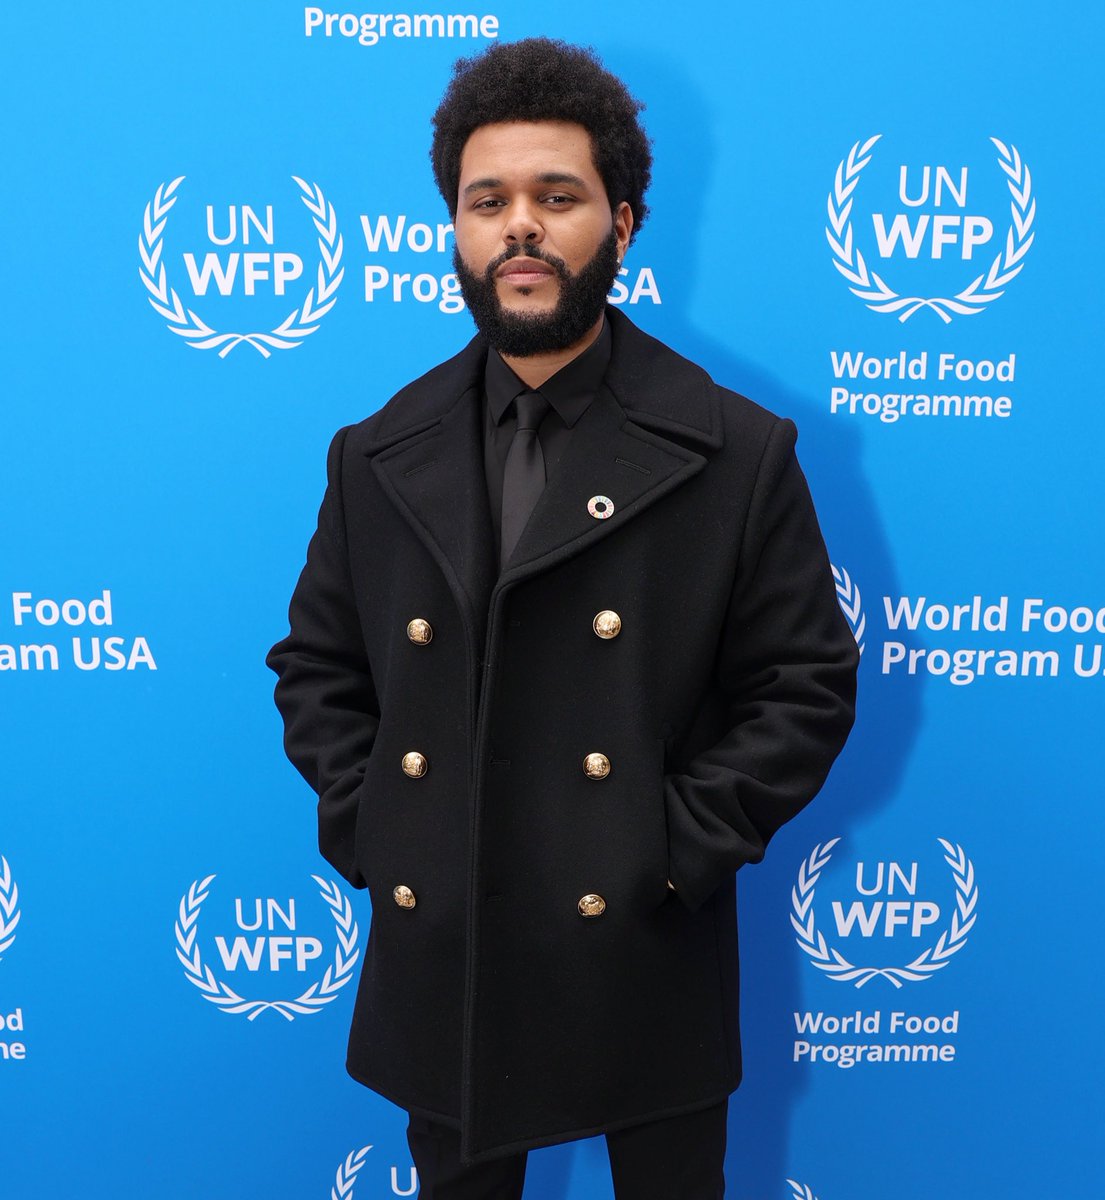 The Weeknd has pledged to donate $2 million to provide 18 million loaves of bread for 157,000+ Palestinians.